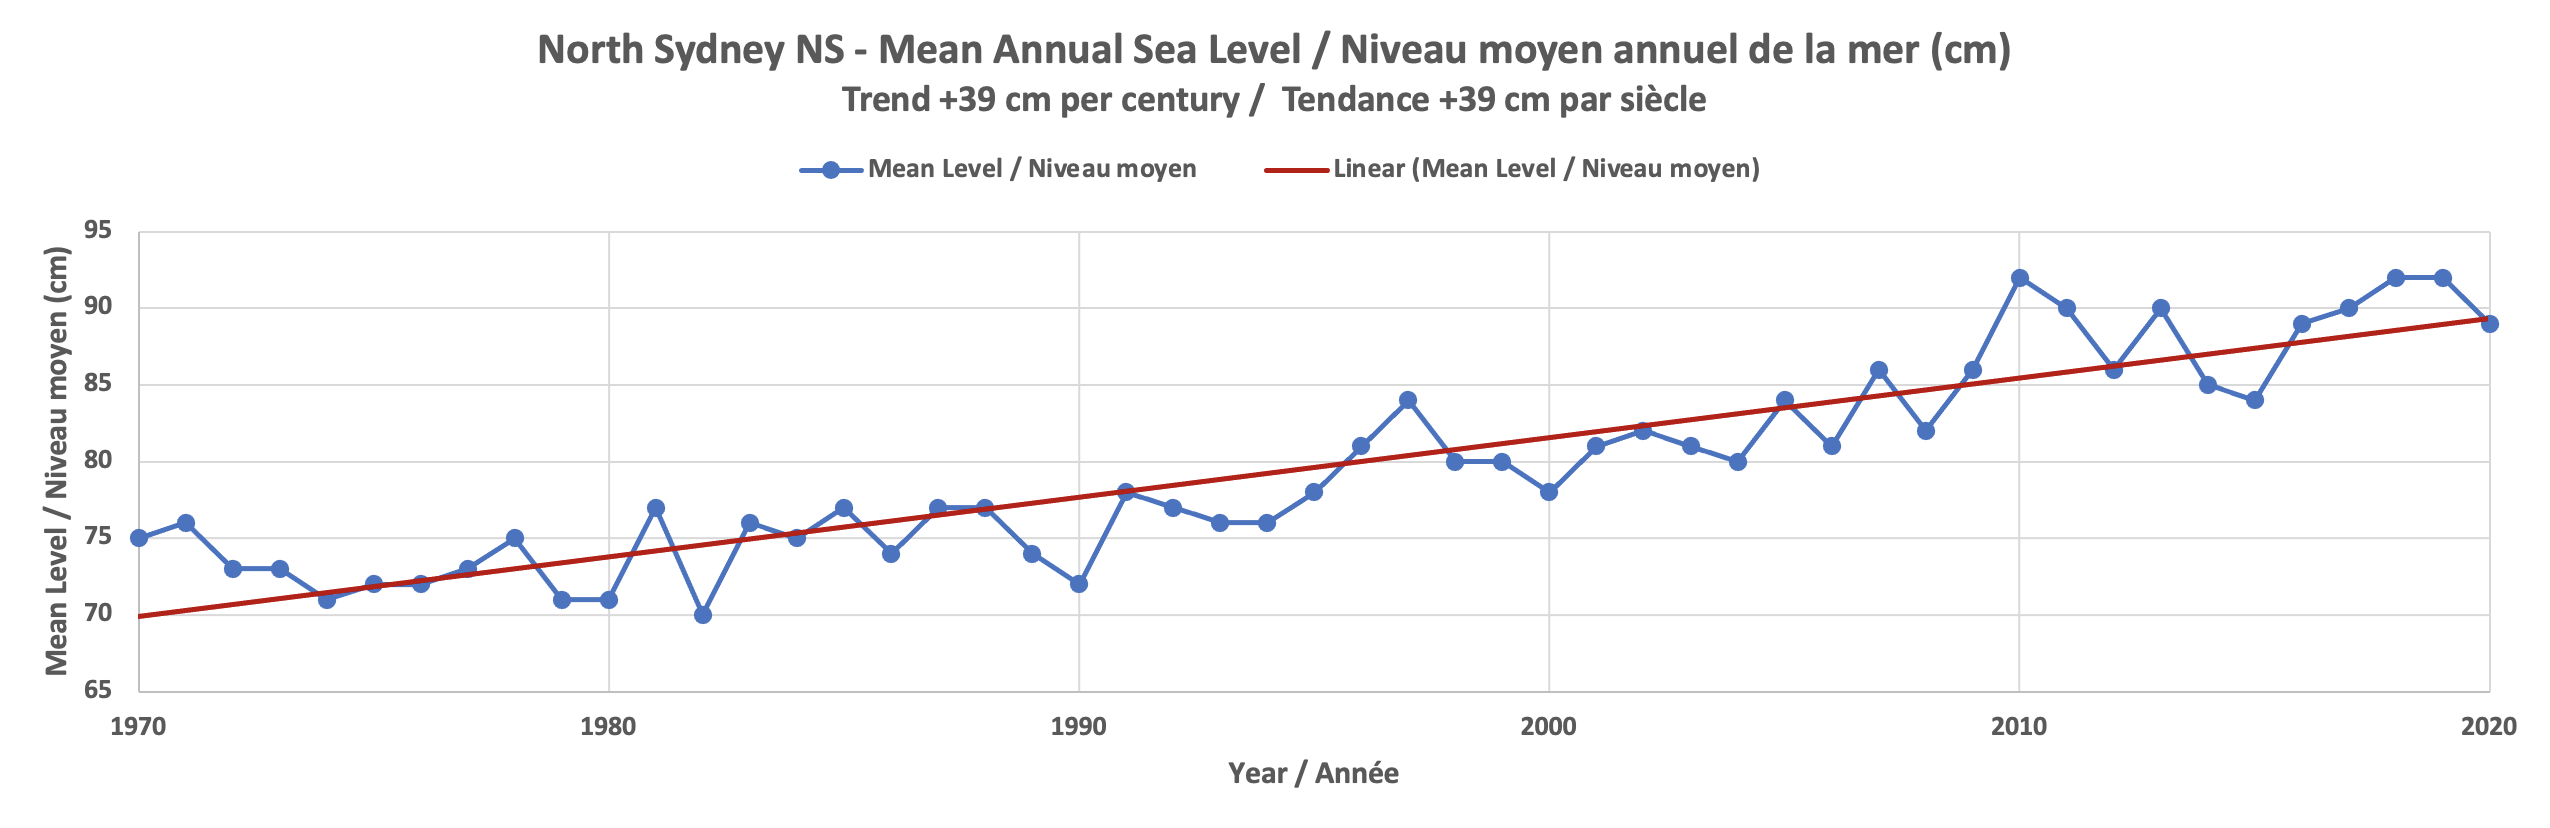 A graph titled "North Sydney NS - Mean Annual Sea Level, Trend +40 cm per century". The graph shows the years 1971-2021 and has an upward trend.